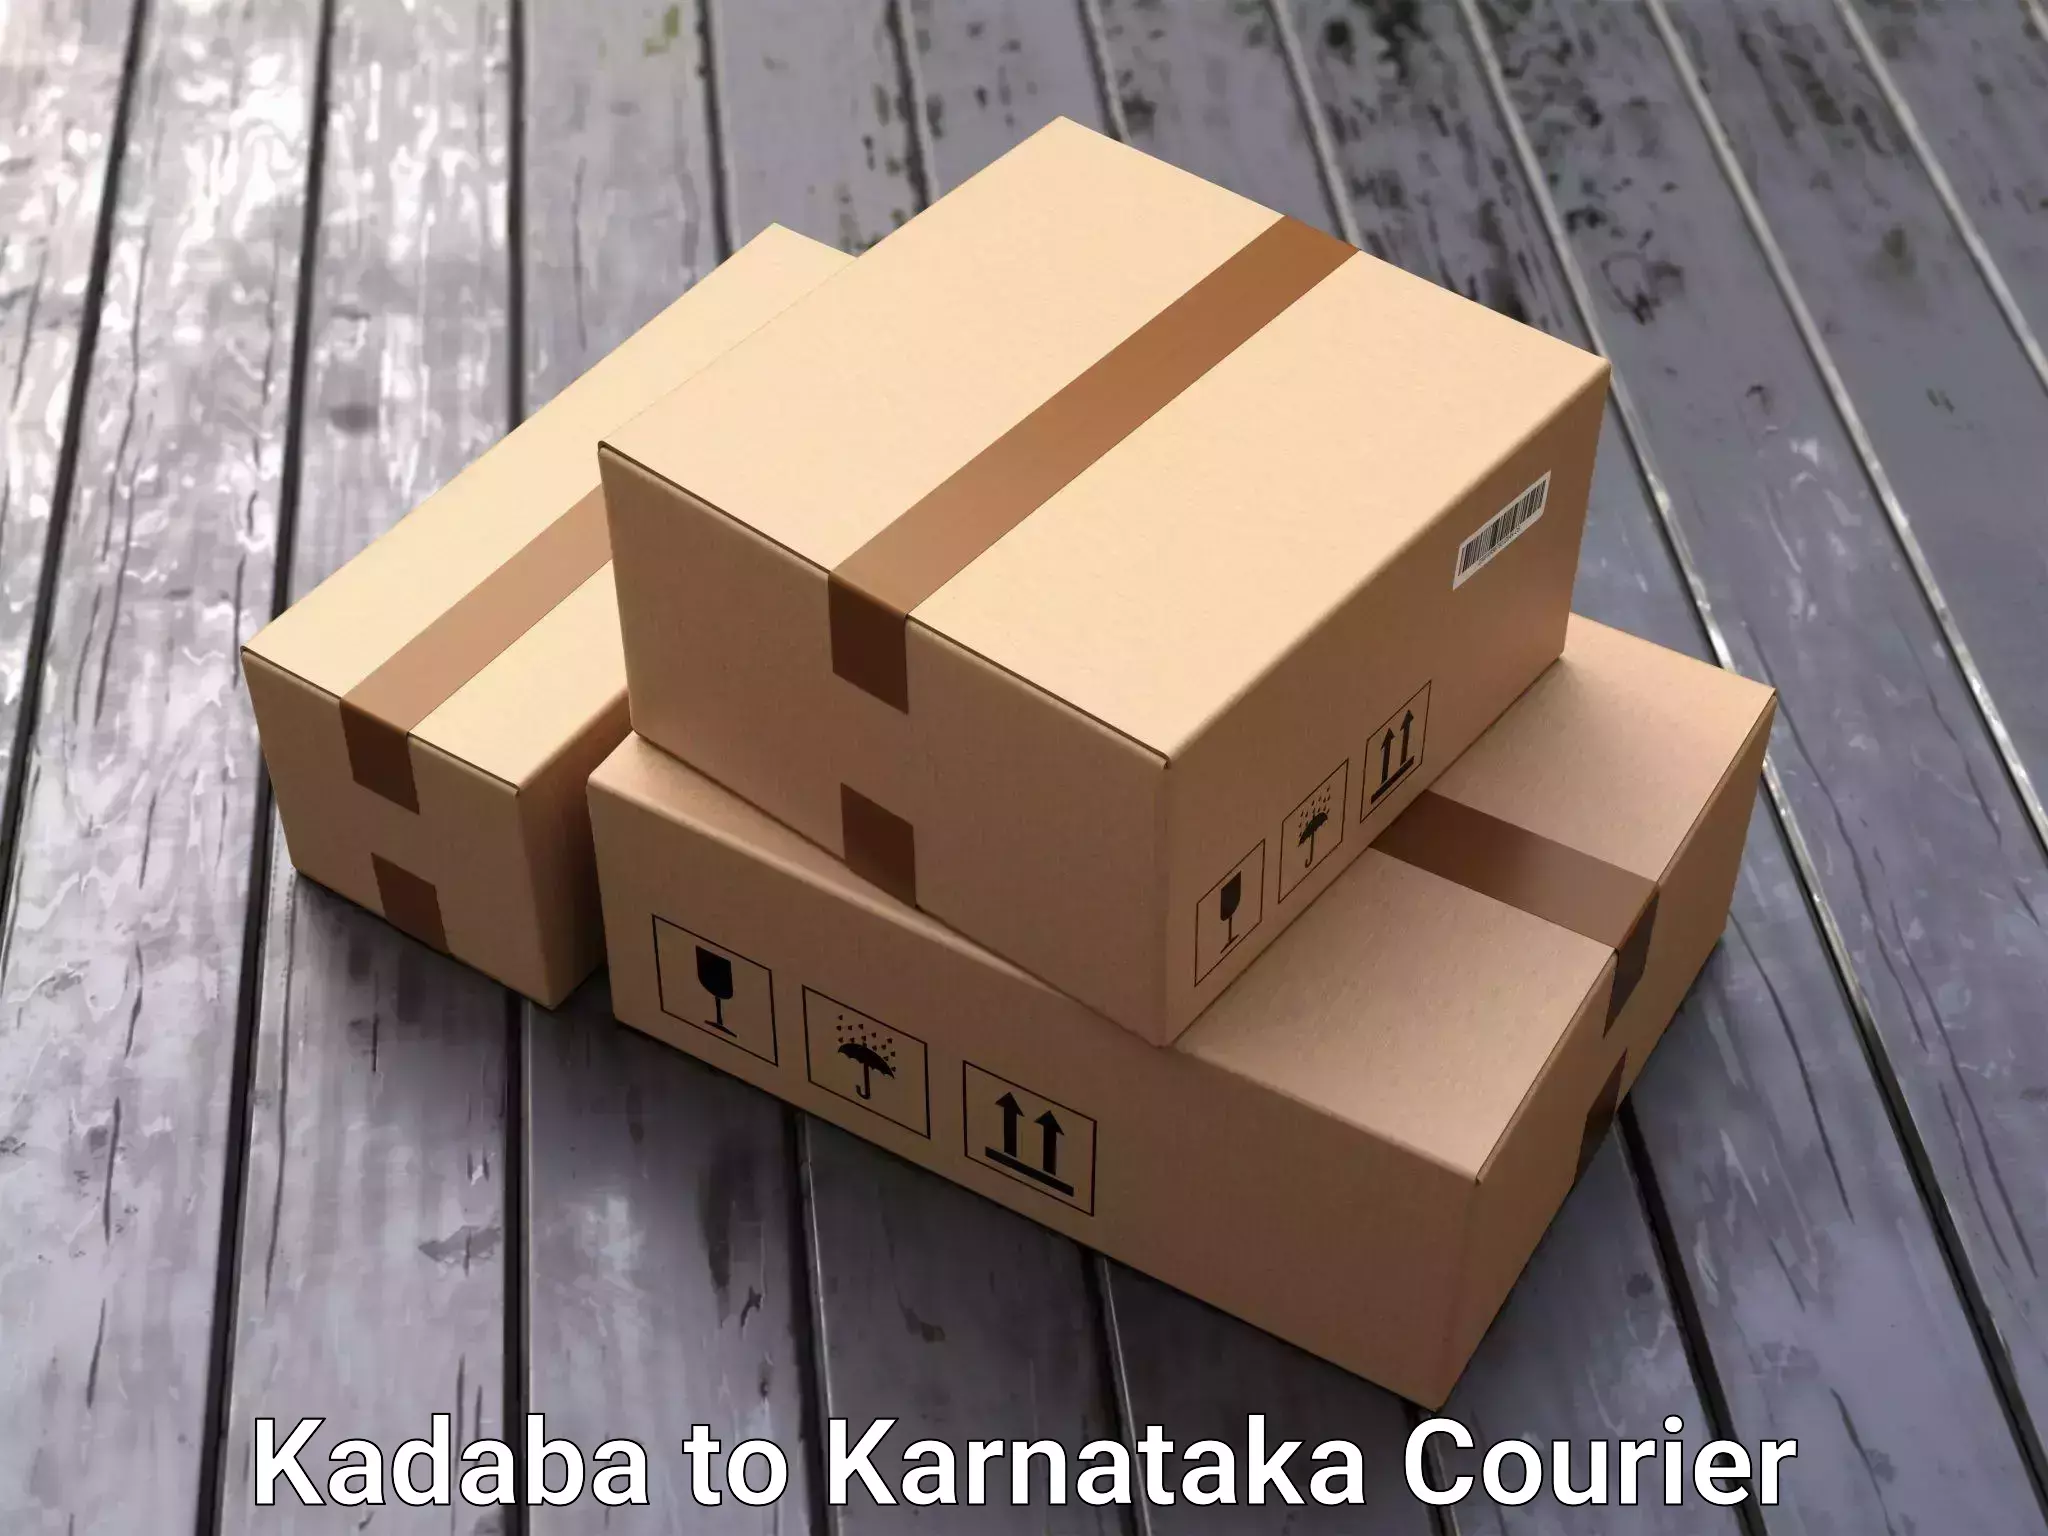 Efficient relocation services in Kadaba to Hospet